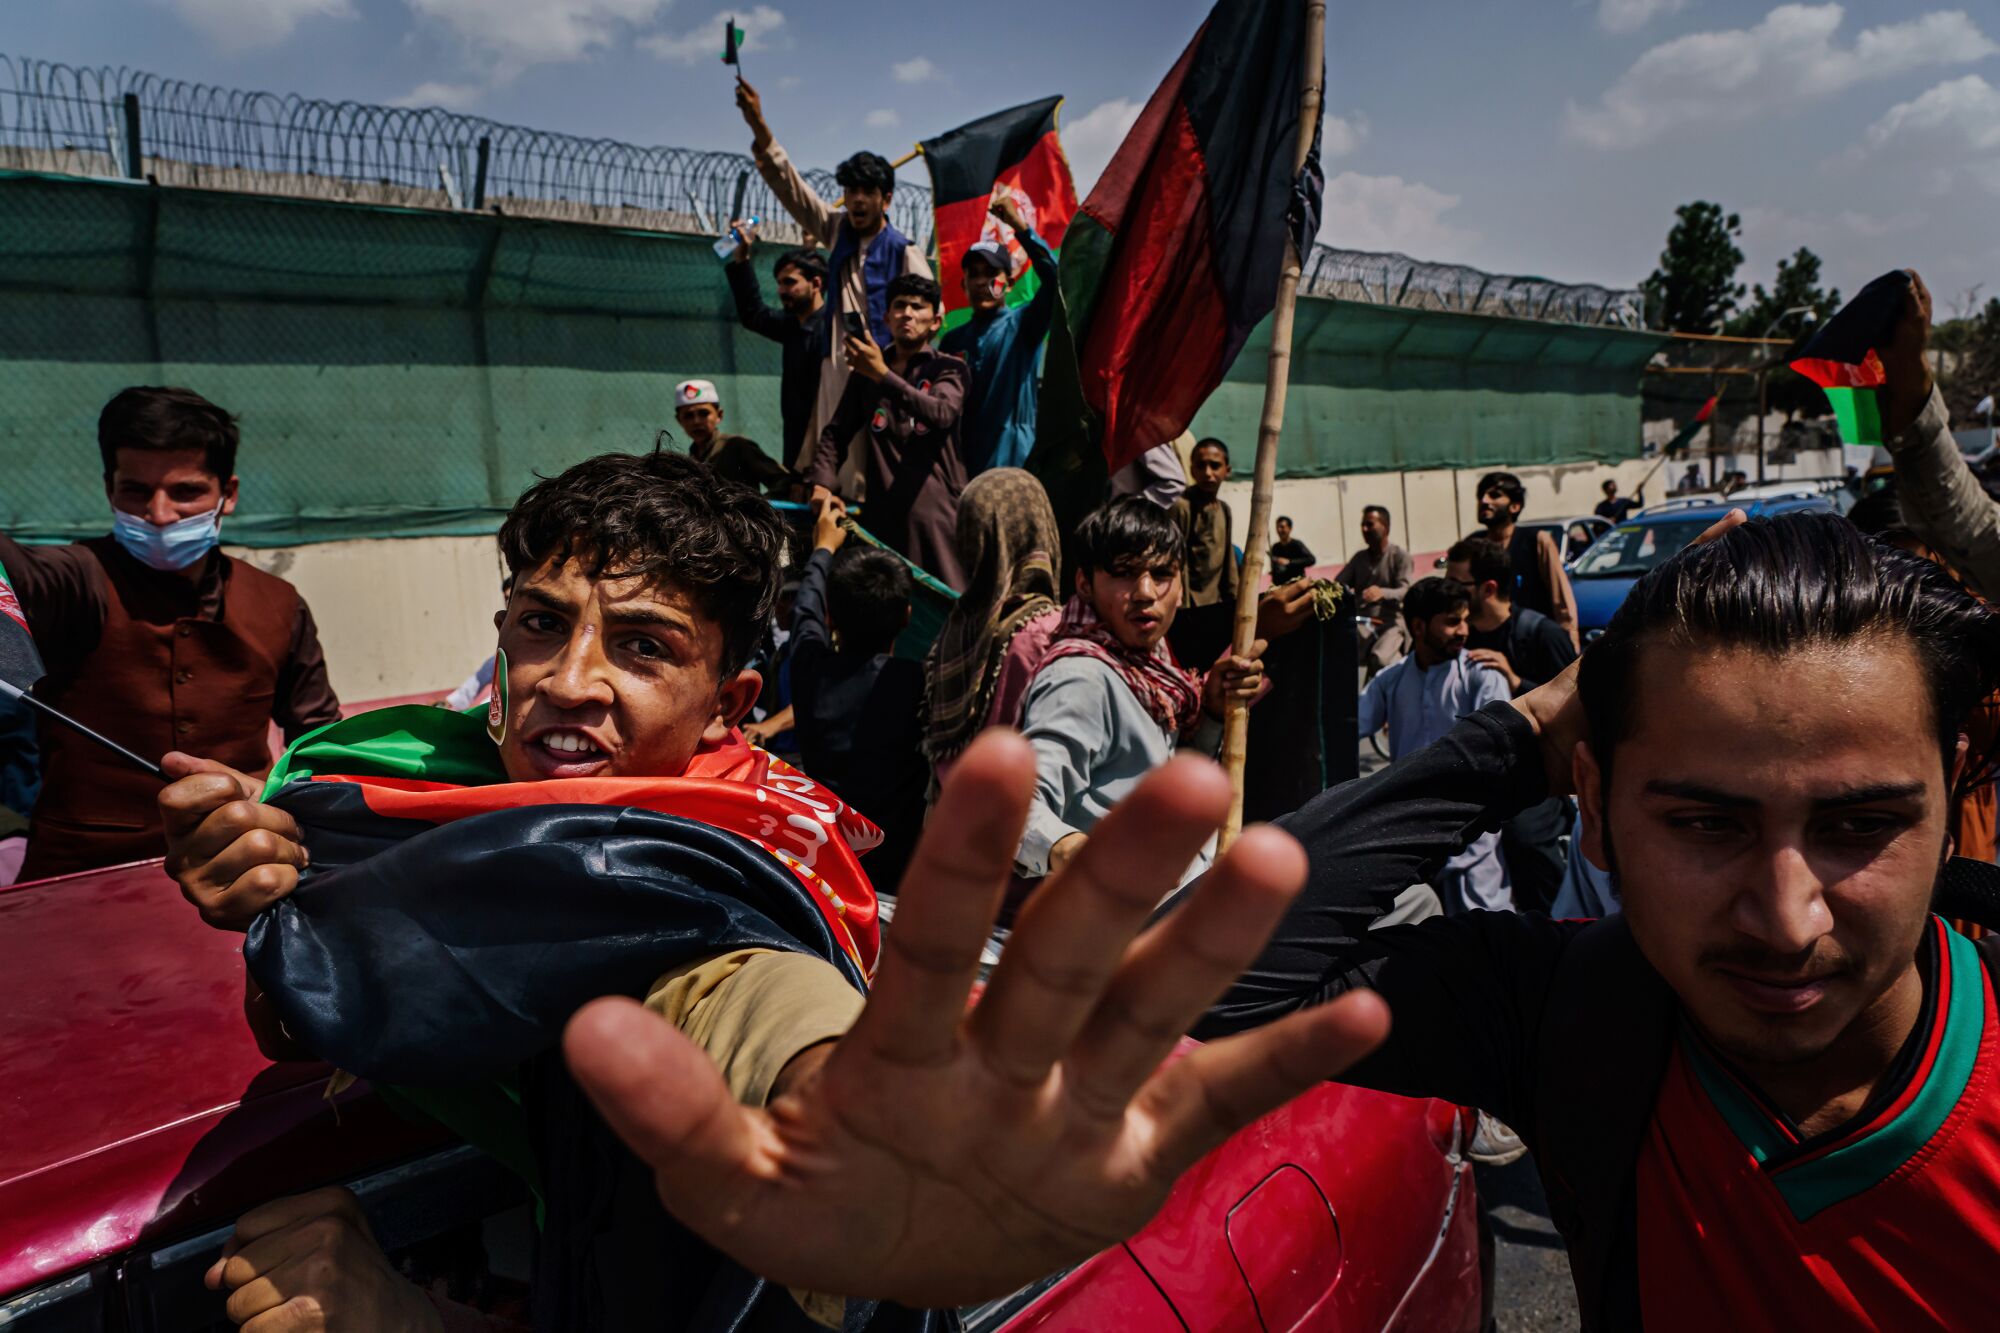 Anti-Taliban protesters march, one tries to block the photographer's lens